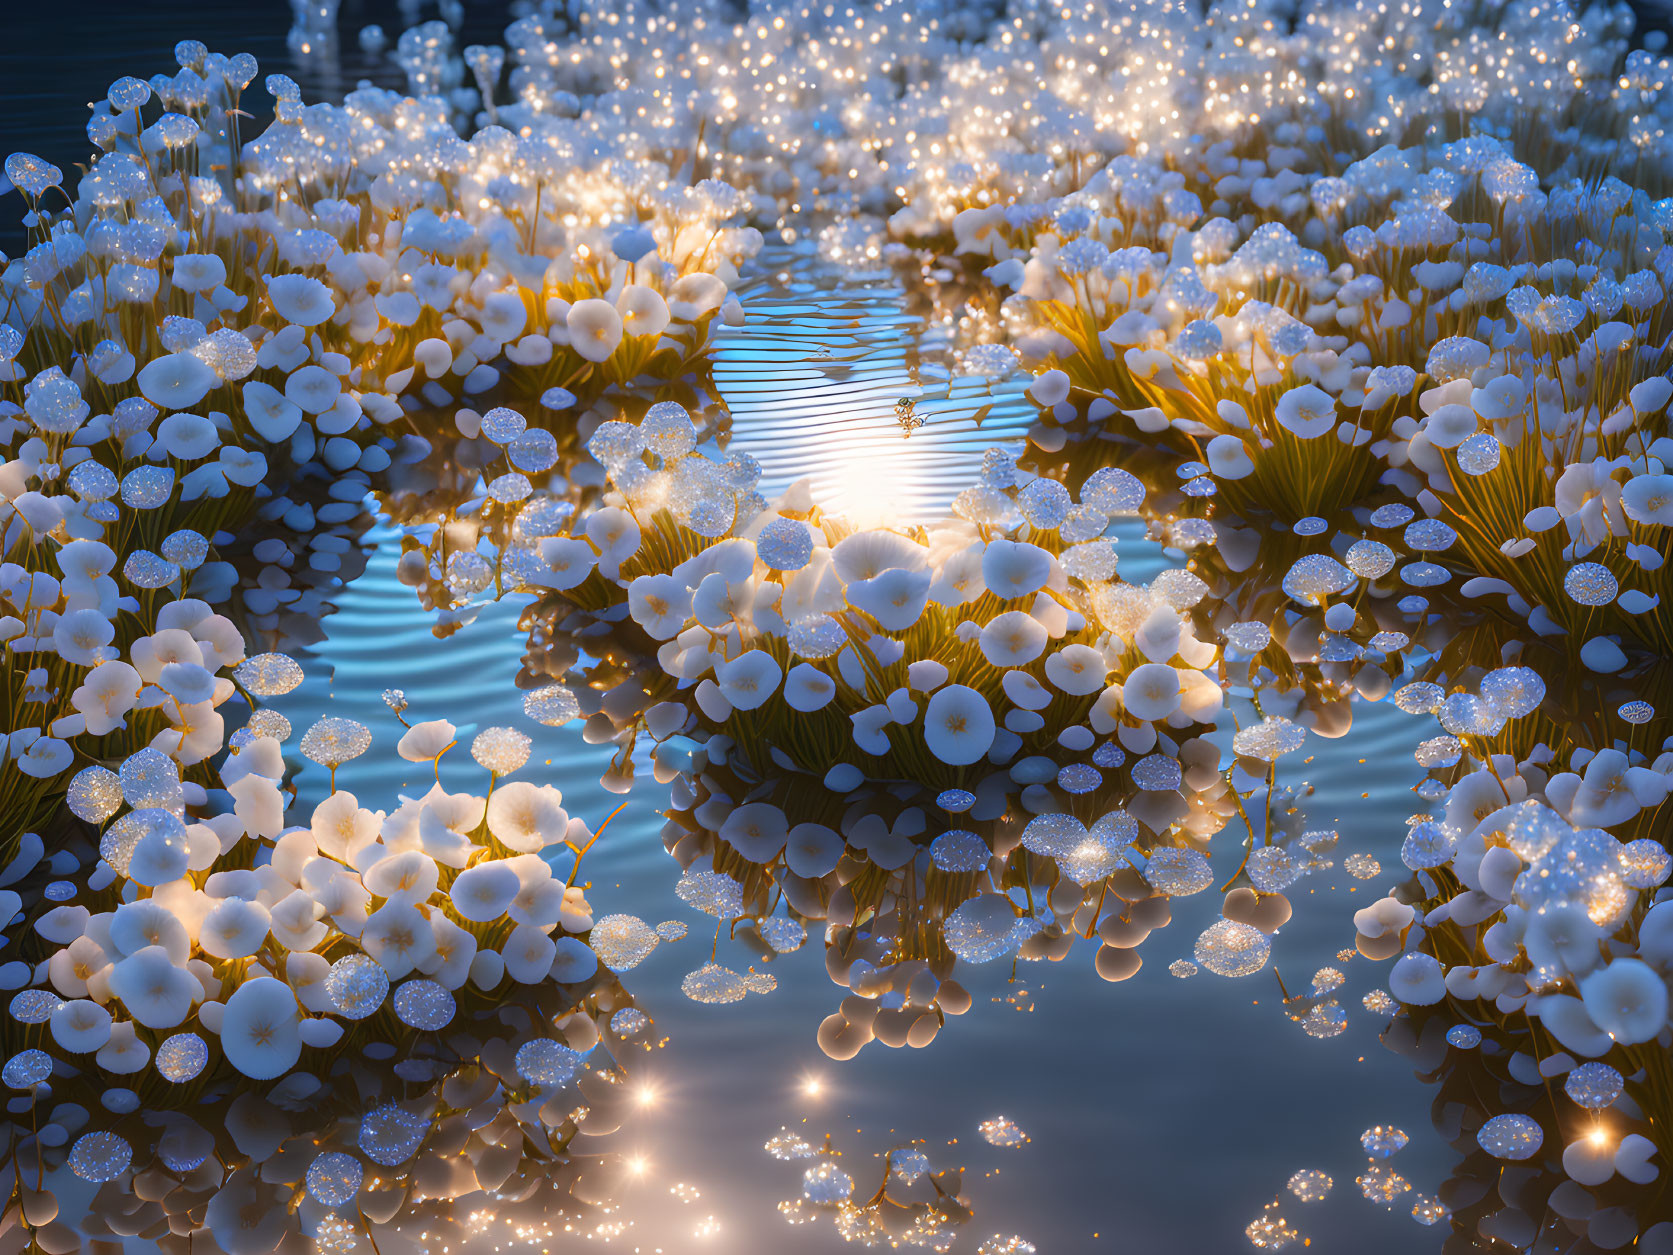 Twilight scene of white flowers floating on water with luminous centers